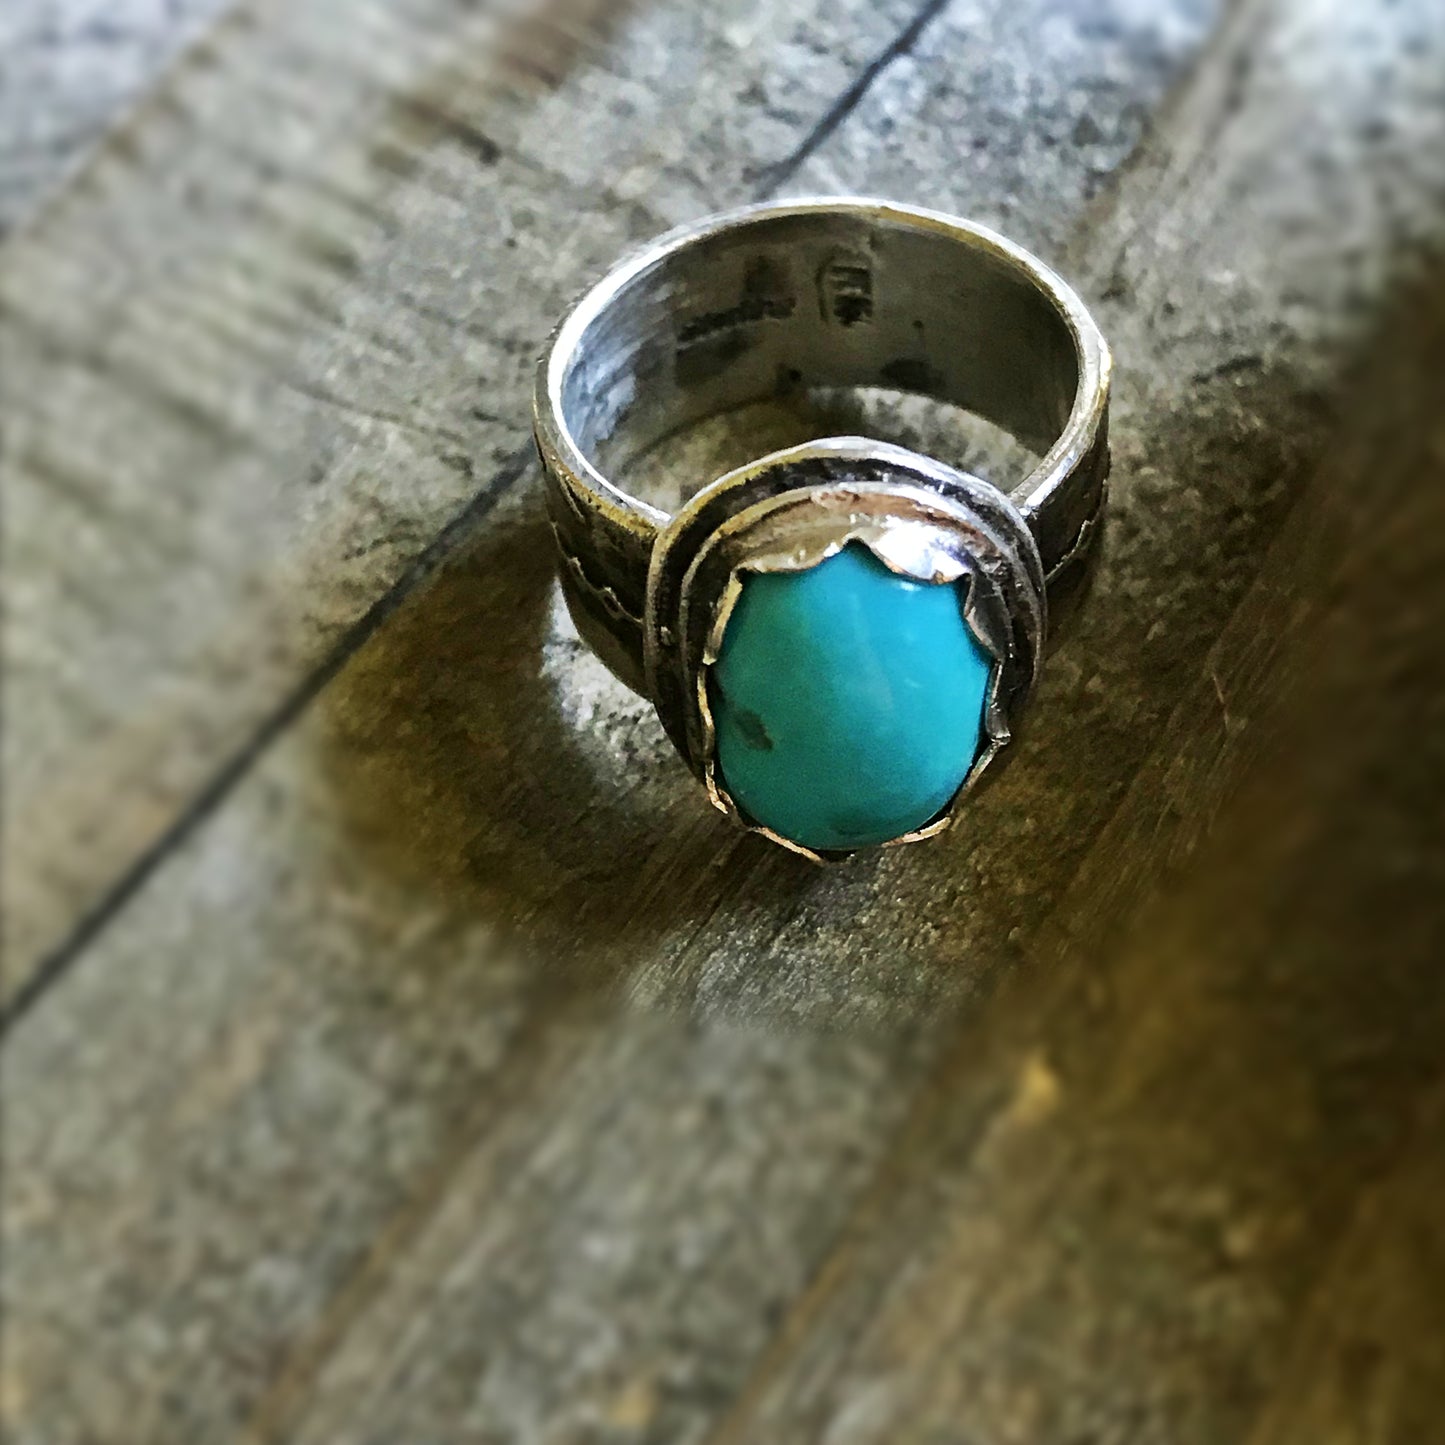 Sleeping Beauty Turquoise Sterling Silver US Size 7 Ring, This handcrafted sterling silver ring with south western style arrows texture featuring pretty sleeping beauty turquoise in a bezel setting. This Ring is made of pure .950 sterling silver and hallmarked as it.  - CosmicDeva